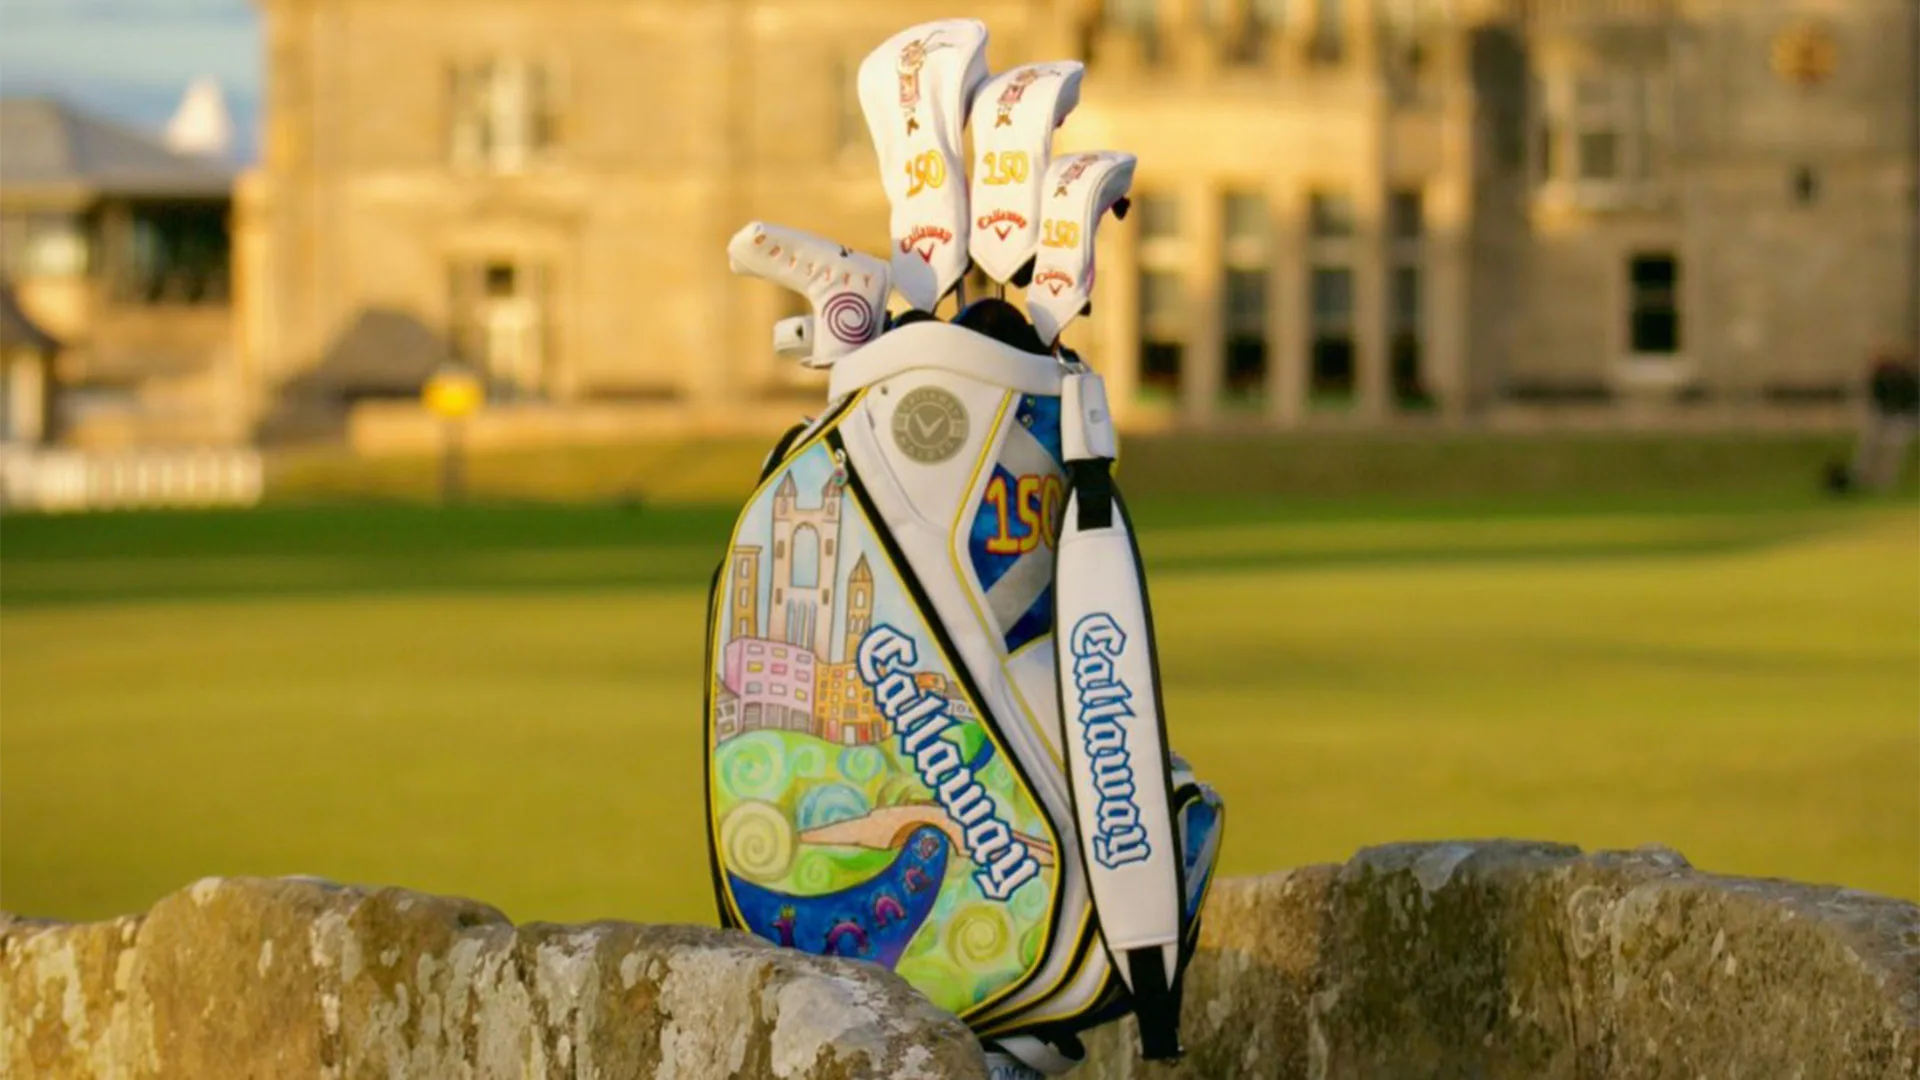 Callaway staff bags for Open Championship designed by local student